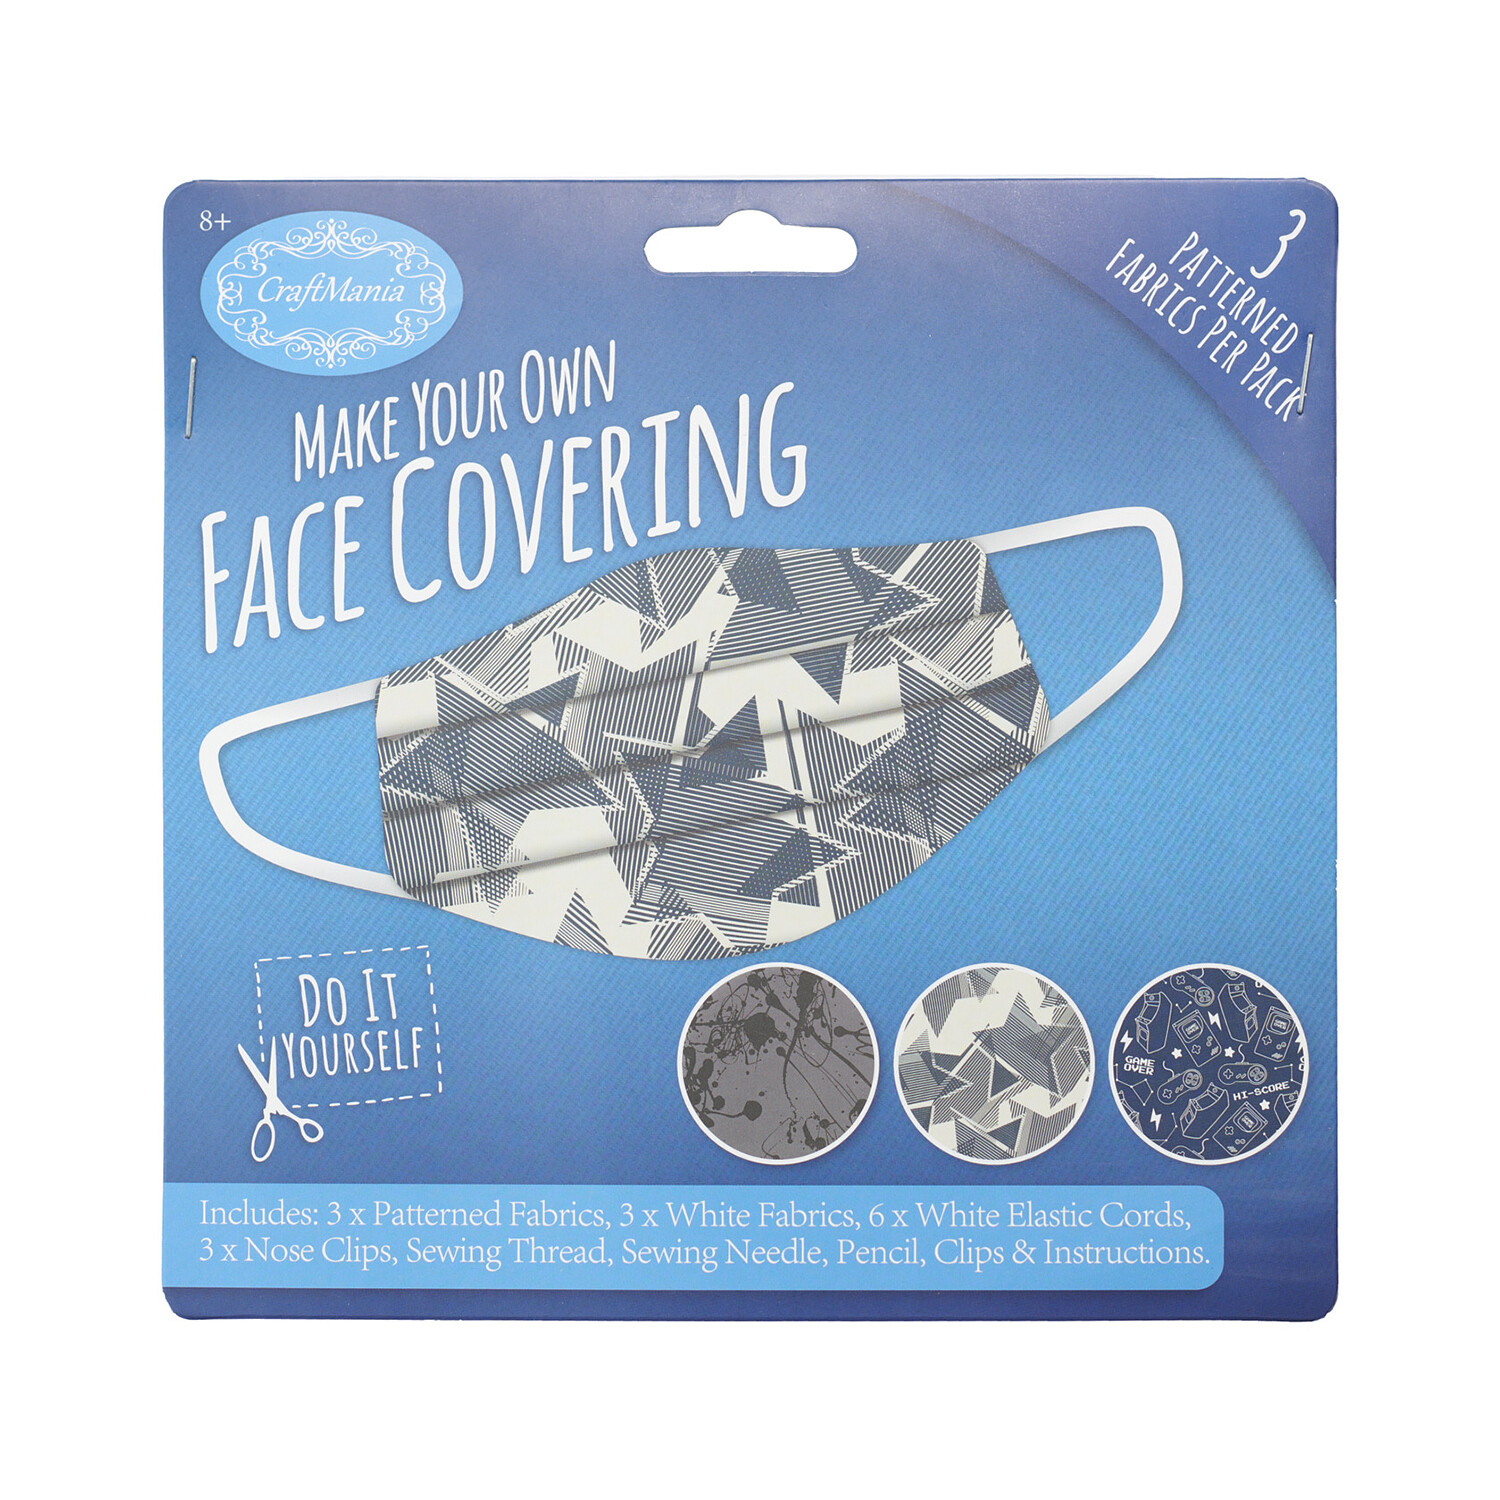 Make Your Own Face Covering - Blue Image 1